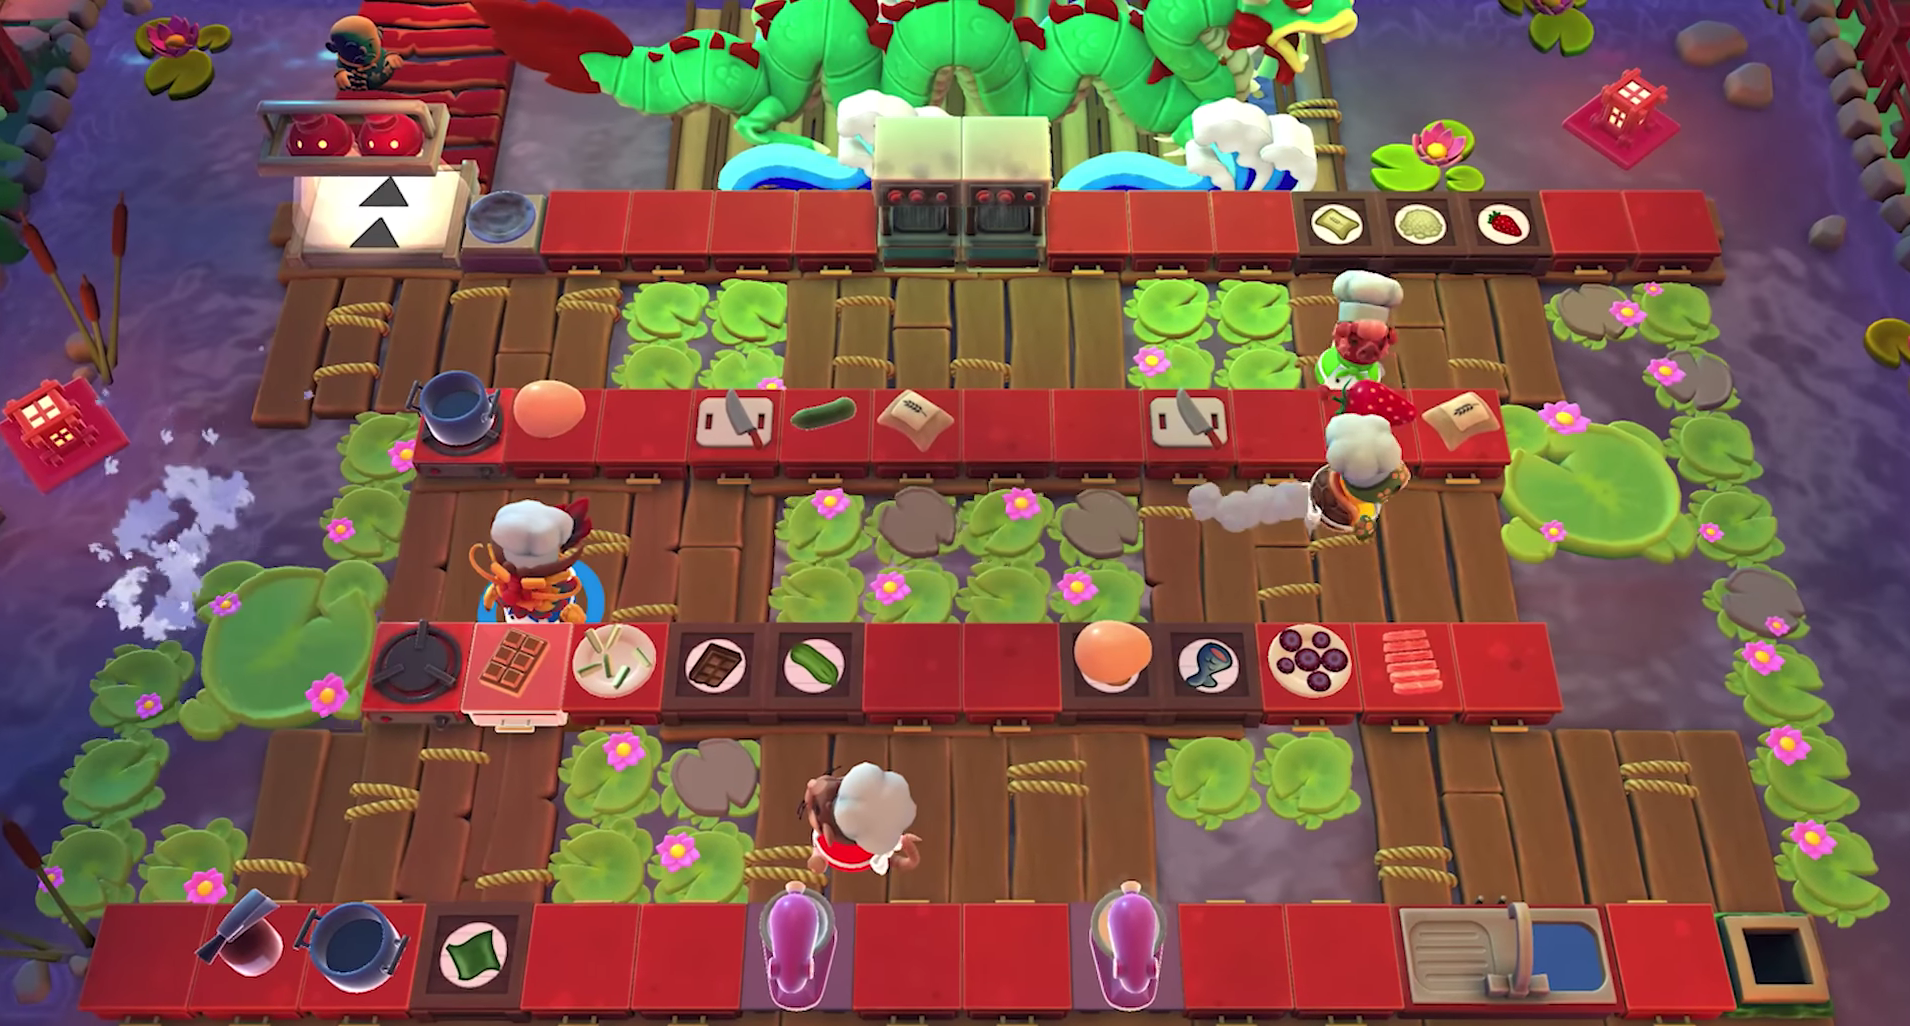 How to Play Cross Platform in Overcooked 2 - N4G